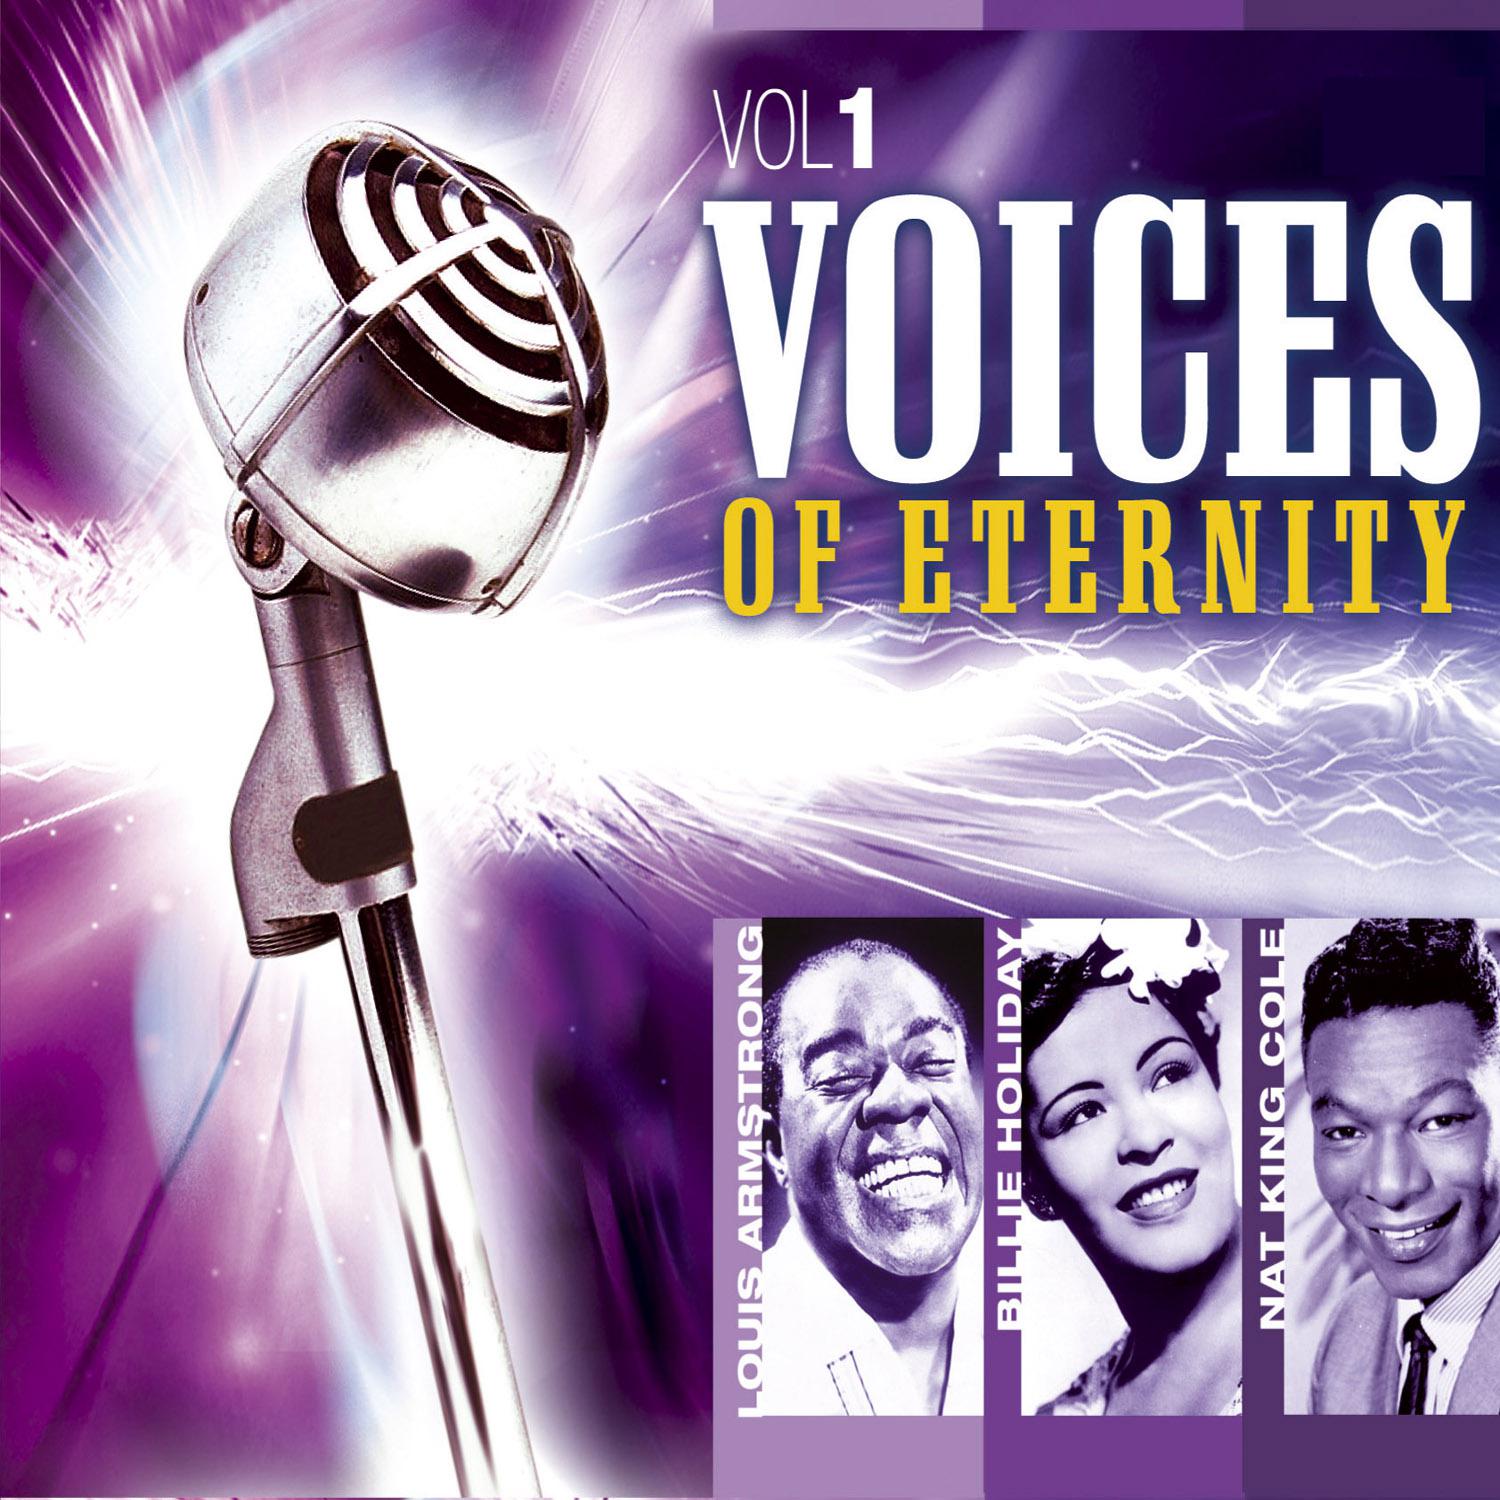 The Voices of Eternity Vol.1